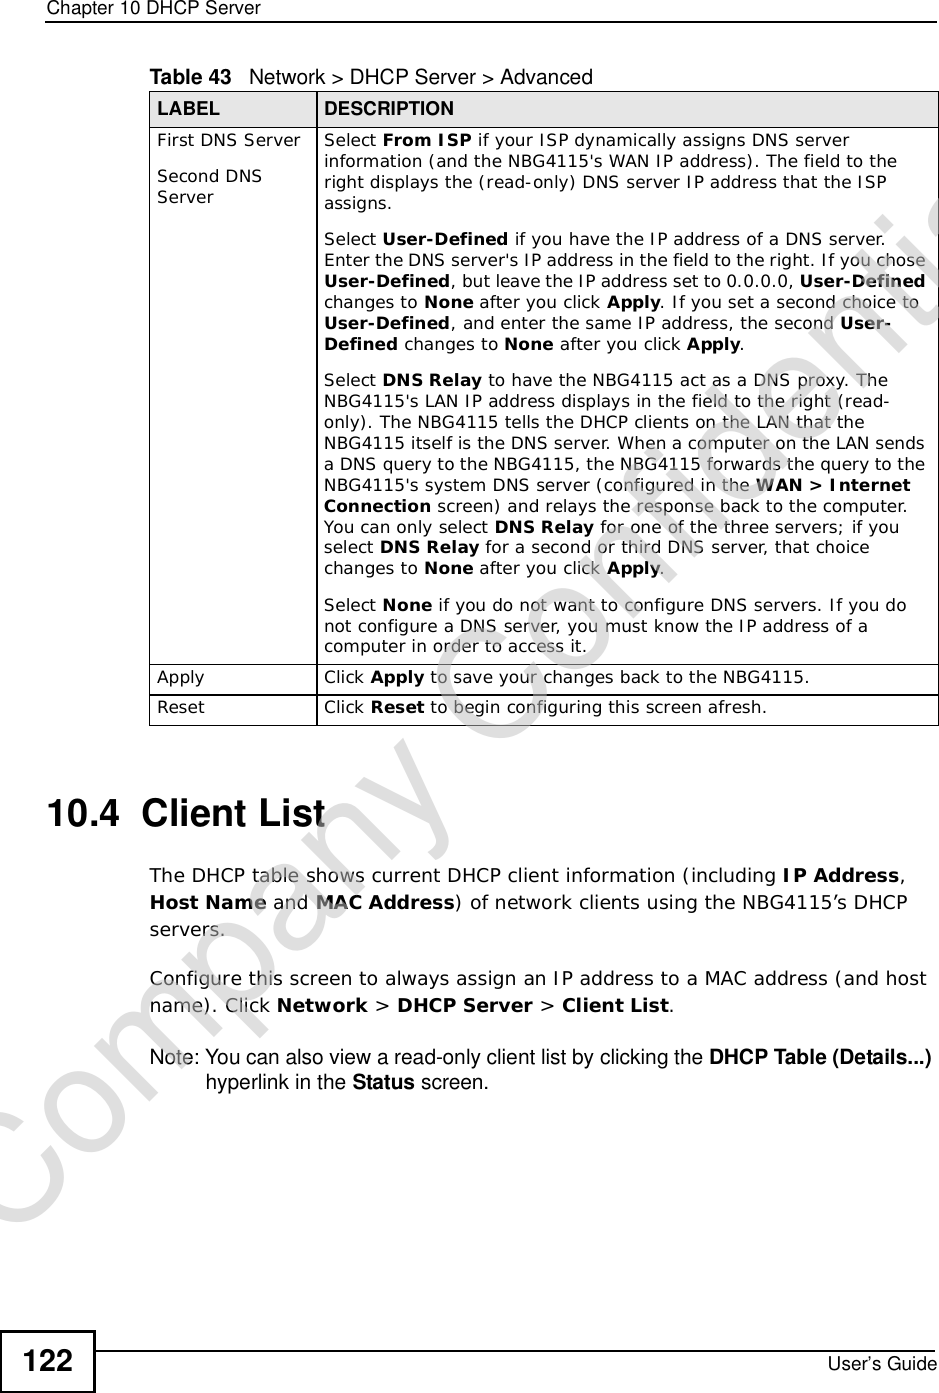 Chapter 10DHCP ServerUser’s Guide12210.4  Client List The DHCP table shows current DHCP client information (including IP Address,HostName and MAC Address) of network clients using the NBG4115’s DHCP servers.Configure this screen to always assign an IP address to a MAC address (and host name). Click Network &gt; DHCP Server &gt; Client List.Note: You can also view a read-only client list by clicking the DHCP Table (Details...) hyperlink in the Status screen. First DNS ServerSecond DNS ServerSelect From ISP if your ISP dynamically assigns DNS server information (and the NBG4115&apos;s WAN IP address). The field to the right displays the (read-only) DNS server IP address that the ISP assigns.Select User-Defined if you have the IP address of a DNS server. Enter the DNS server&apos;s IP address in the field to the right. If you chose User-Defined, but leave the IP address set to 0.0.0.0, User-Defined changes to None after you click Apply. If you set a second choice to User-Defined, and enter the same IP address, the second User-Defined changes to None after you click Apply.Select DNS Relay to have the NBG4115 act as a DNS proxy. The NBG4115&apos;s LAN IP address displays in the field to the right (read-only). The NBG4115 tells the DHCP clients on the LAN that the NBG4115 itself is the DNS server. When a computer on the LAN sends a DNS query to the NBG4115, the NBG4115 forwards the query to the NBG4115&apos;s system DNS server (configured in the WAN &gt; Internet Connection screen) and relays the response back to the computer. You can only select DNS Relay for one of the three servers; if you select DNS Relay for a second or third DNS server, that choice changes to None after you click Apply.Select None if you do not want to configure DNS servers. If you do not configure a DNS server, you must know the IP address of a computer in order to access it.Apply Click Apply to save your changes back to the NBG4115.Reset Click Reset to begin configuring this screen afresh.Table 43   Network &gt; DHCP Server &gt; AdvancedLABEL DESCRIPTIONCompany Confidential